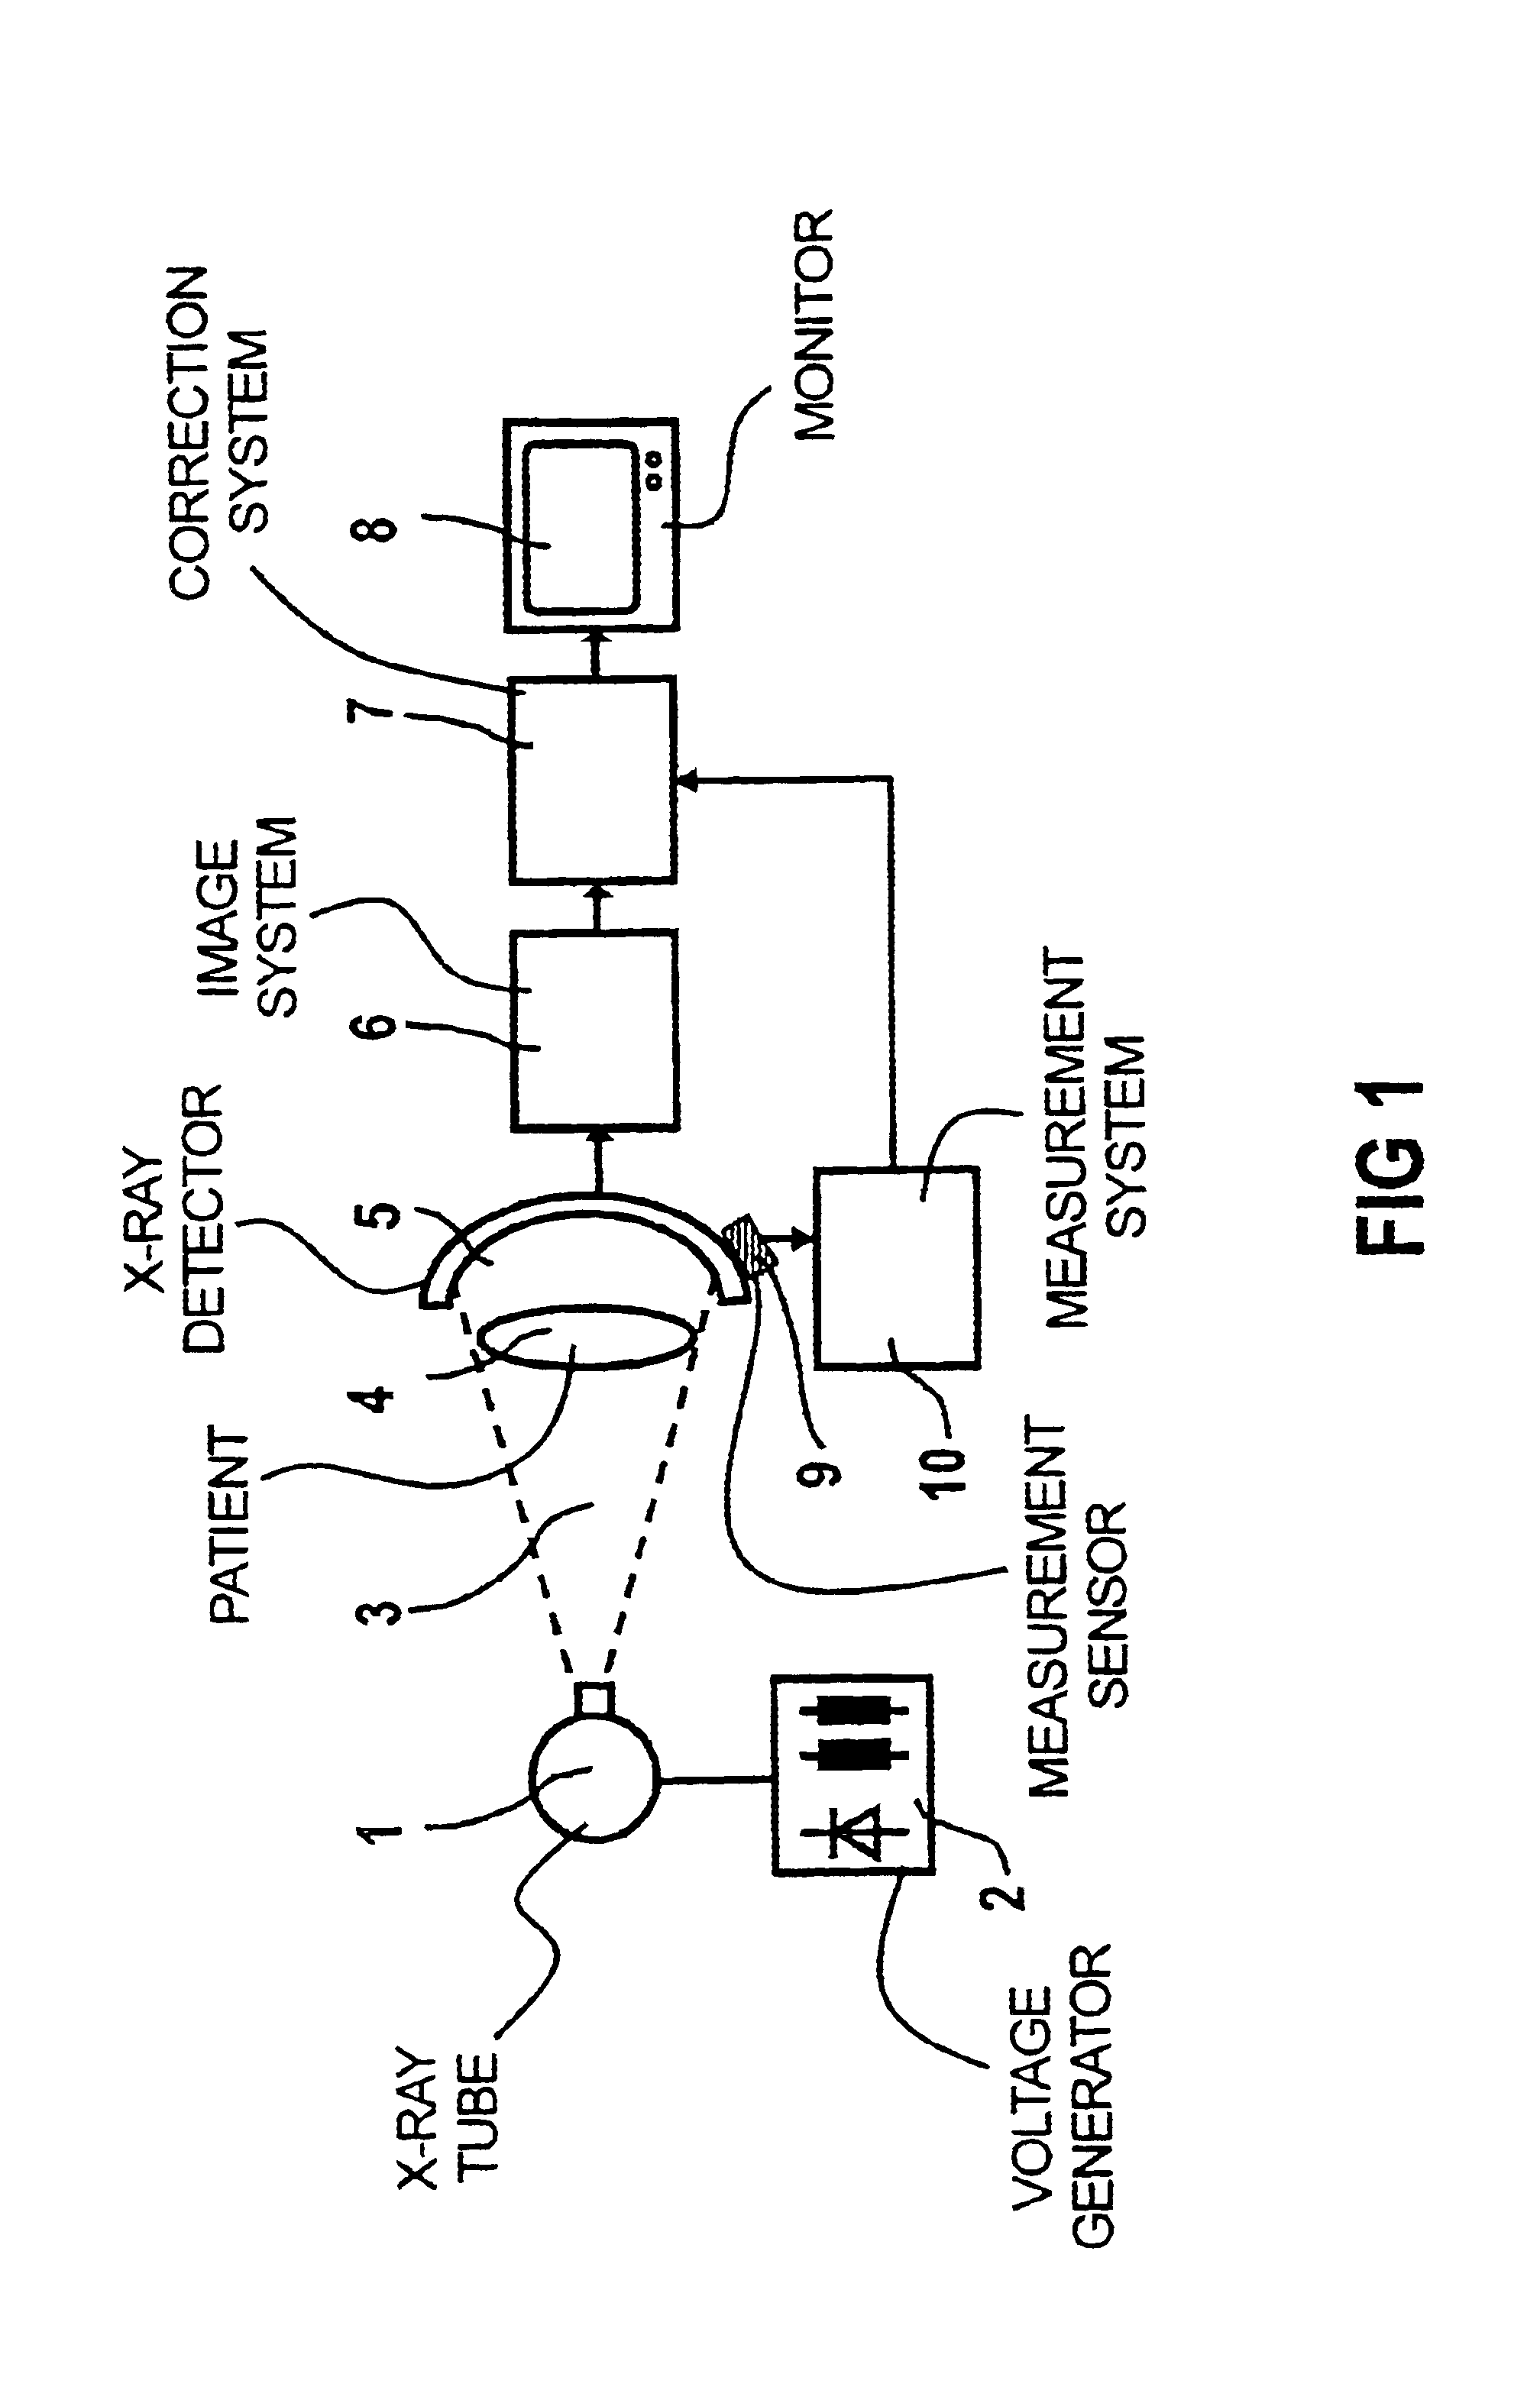 X-ray diagnostics installation with a flexible solid state X-ray detector